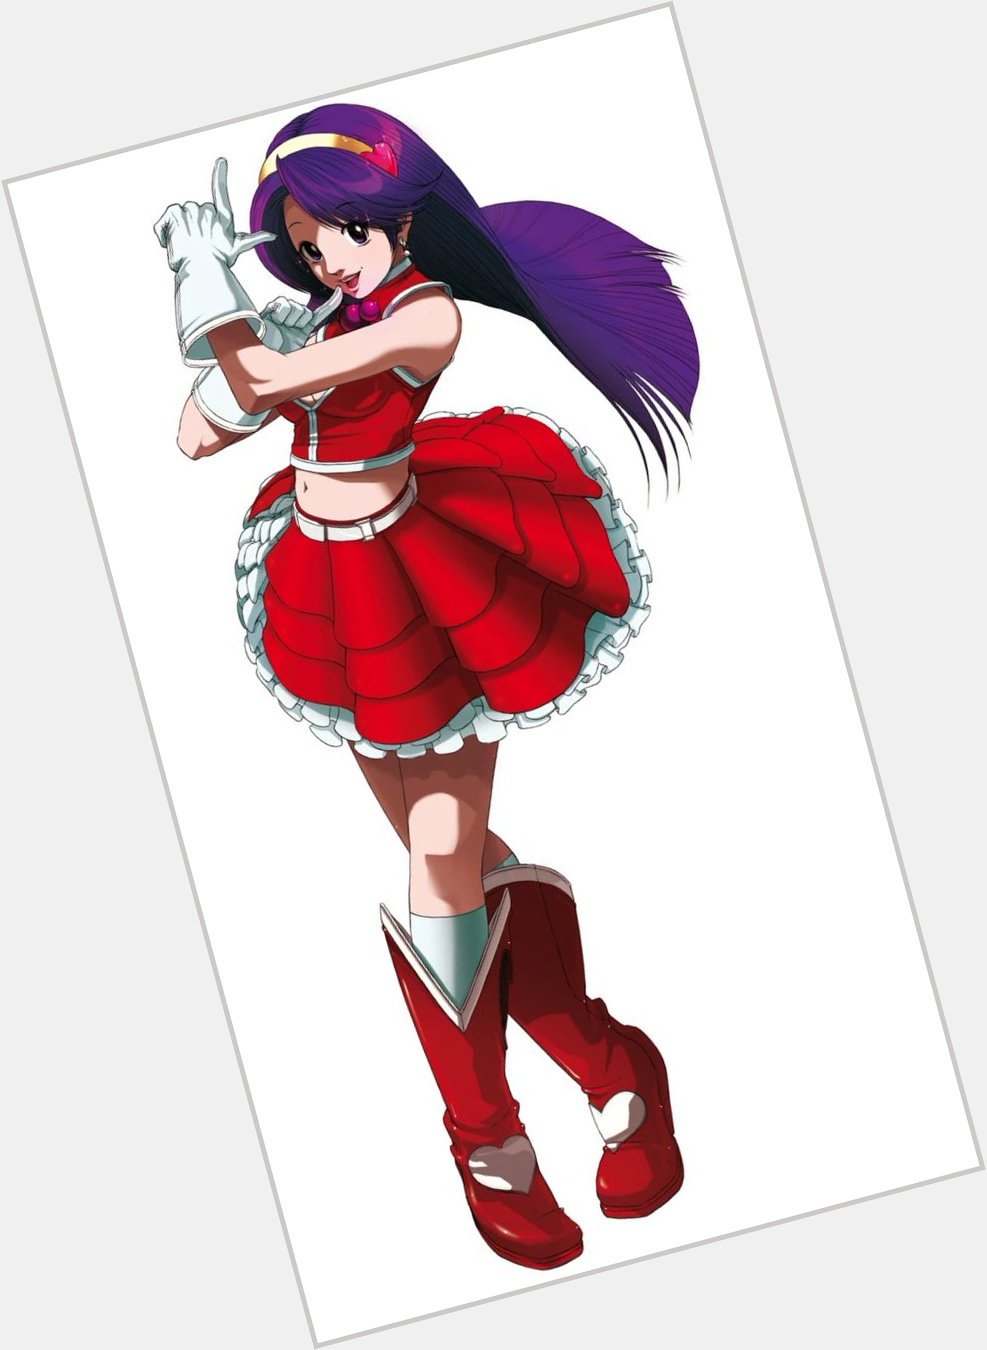 Happy birthday to 2nd best girl, Athena Asamiya!!! This was her best outfit until she got added to XV. 